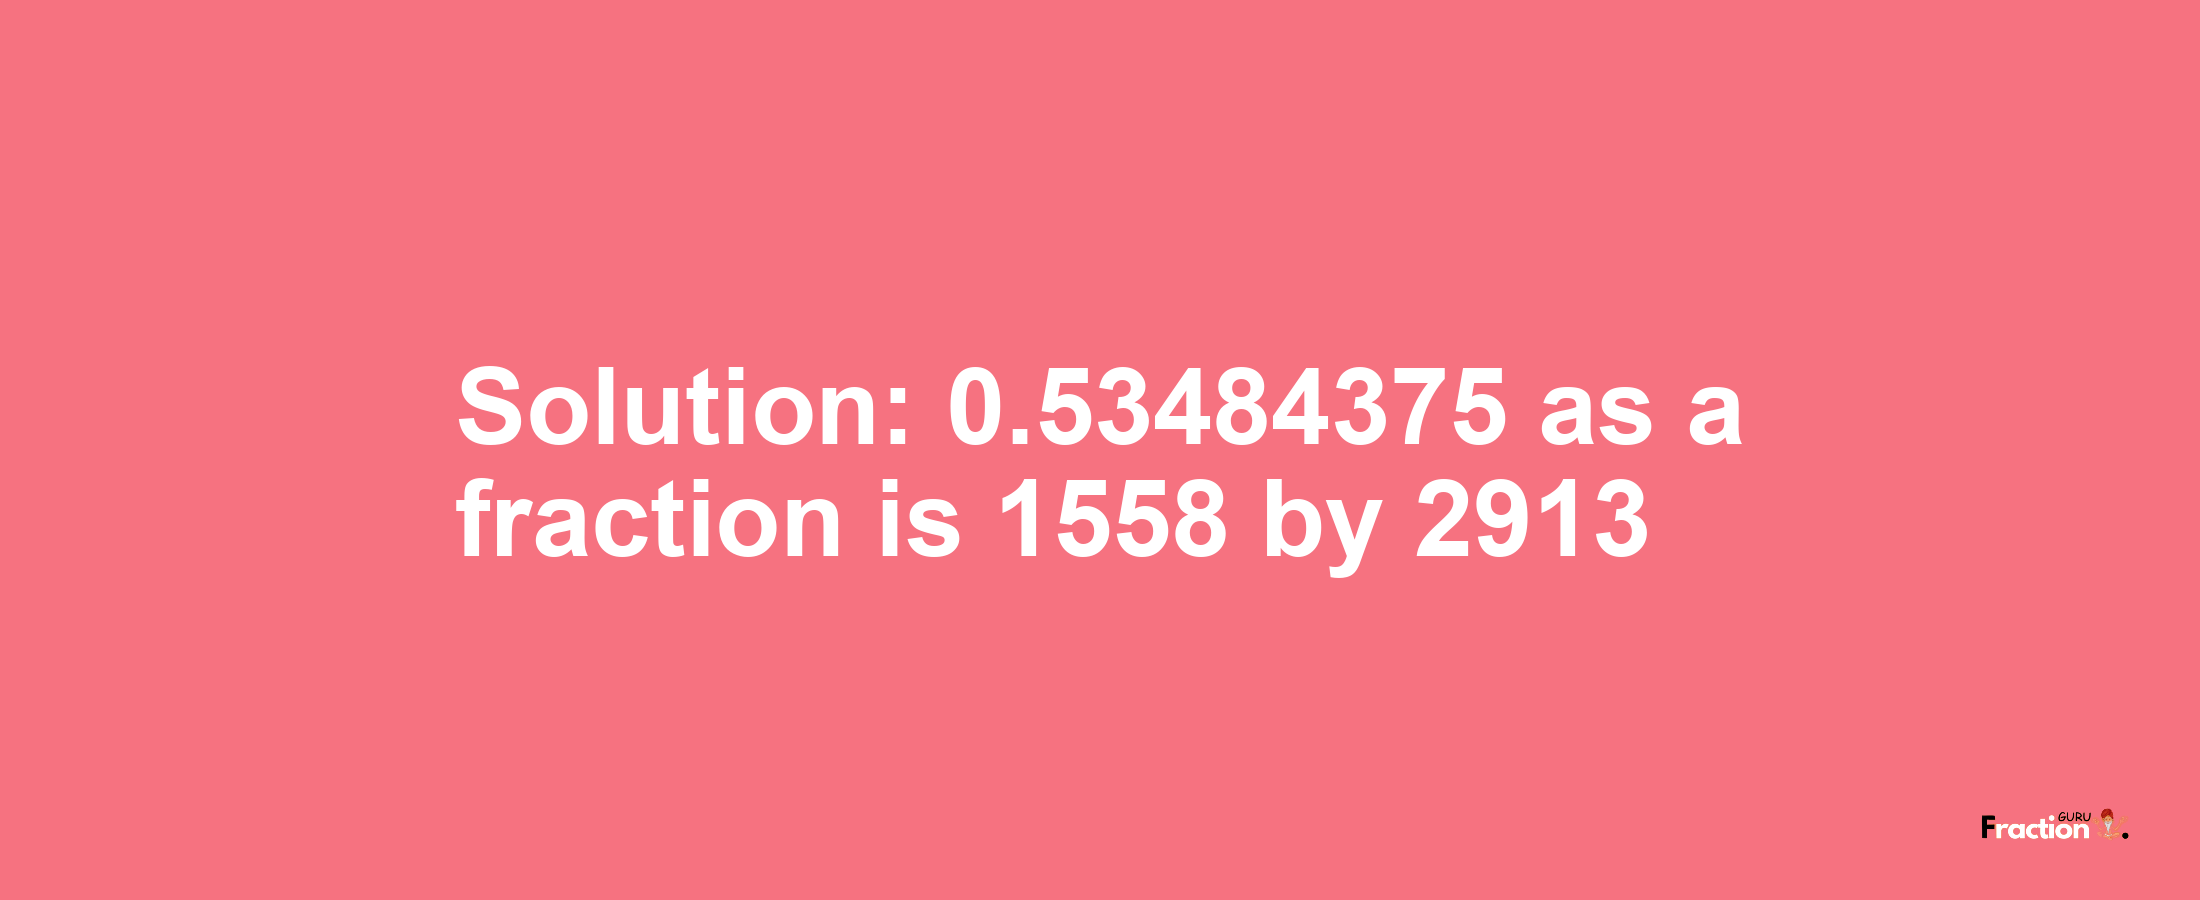 Solution:0.53484375 as a fraction is 1558/2913